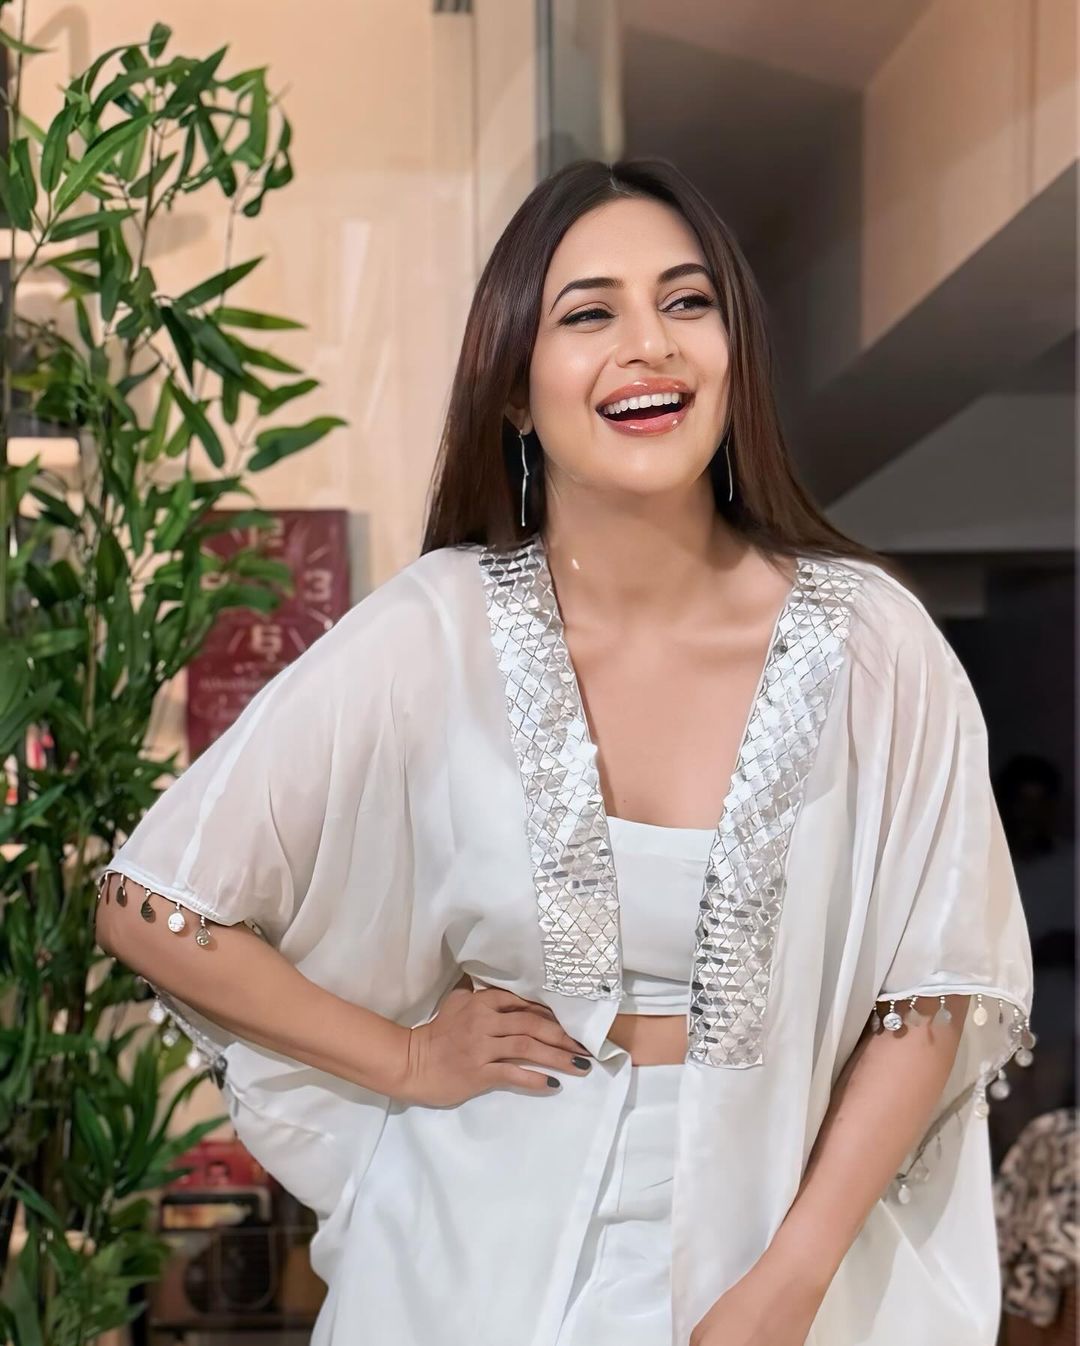 Divyanka Tripathi Dahiya Opened Up About The Possibility Of Yeh Hai Mohabbatein Season 2. Let’s Delve Here To Learn About It.